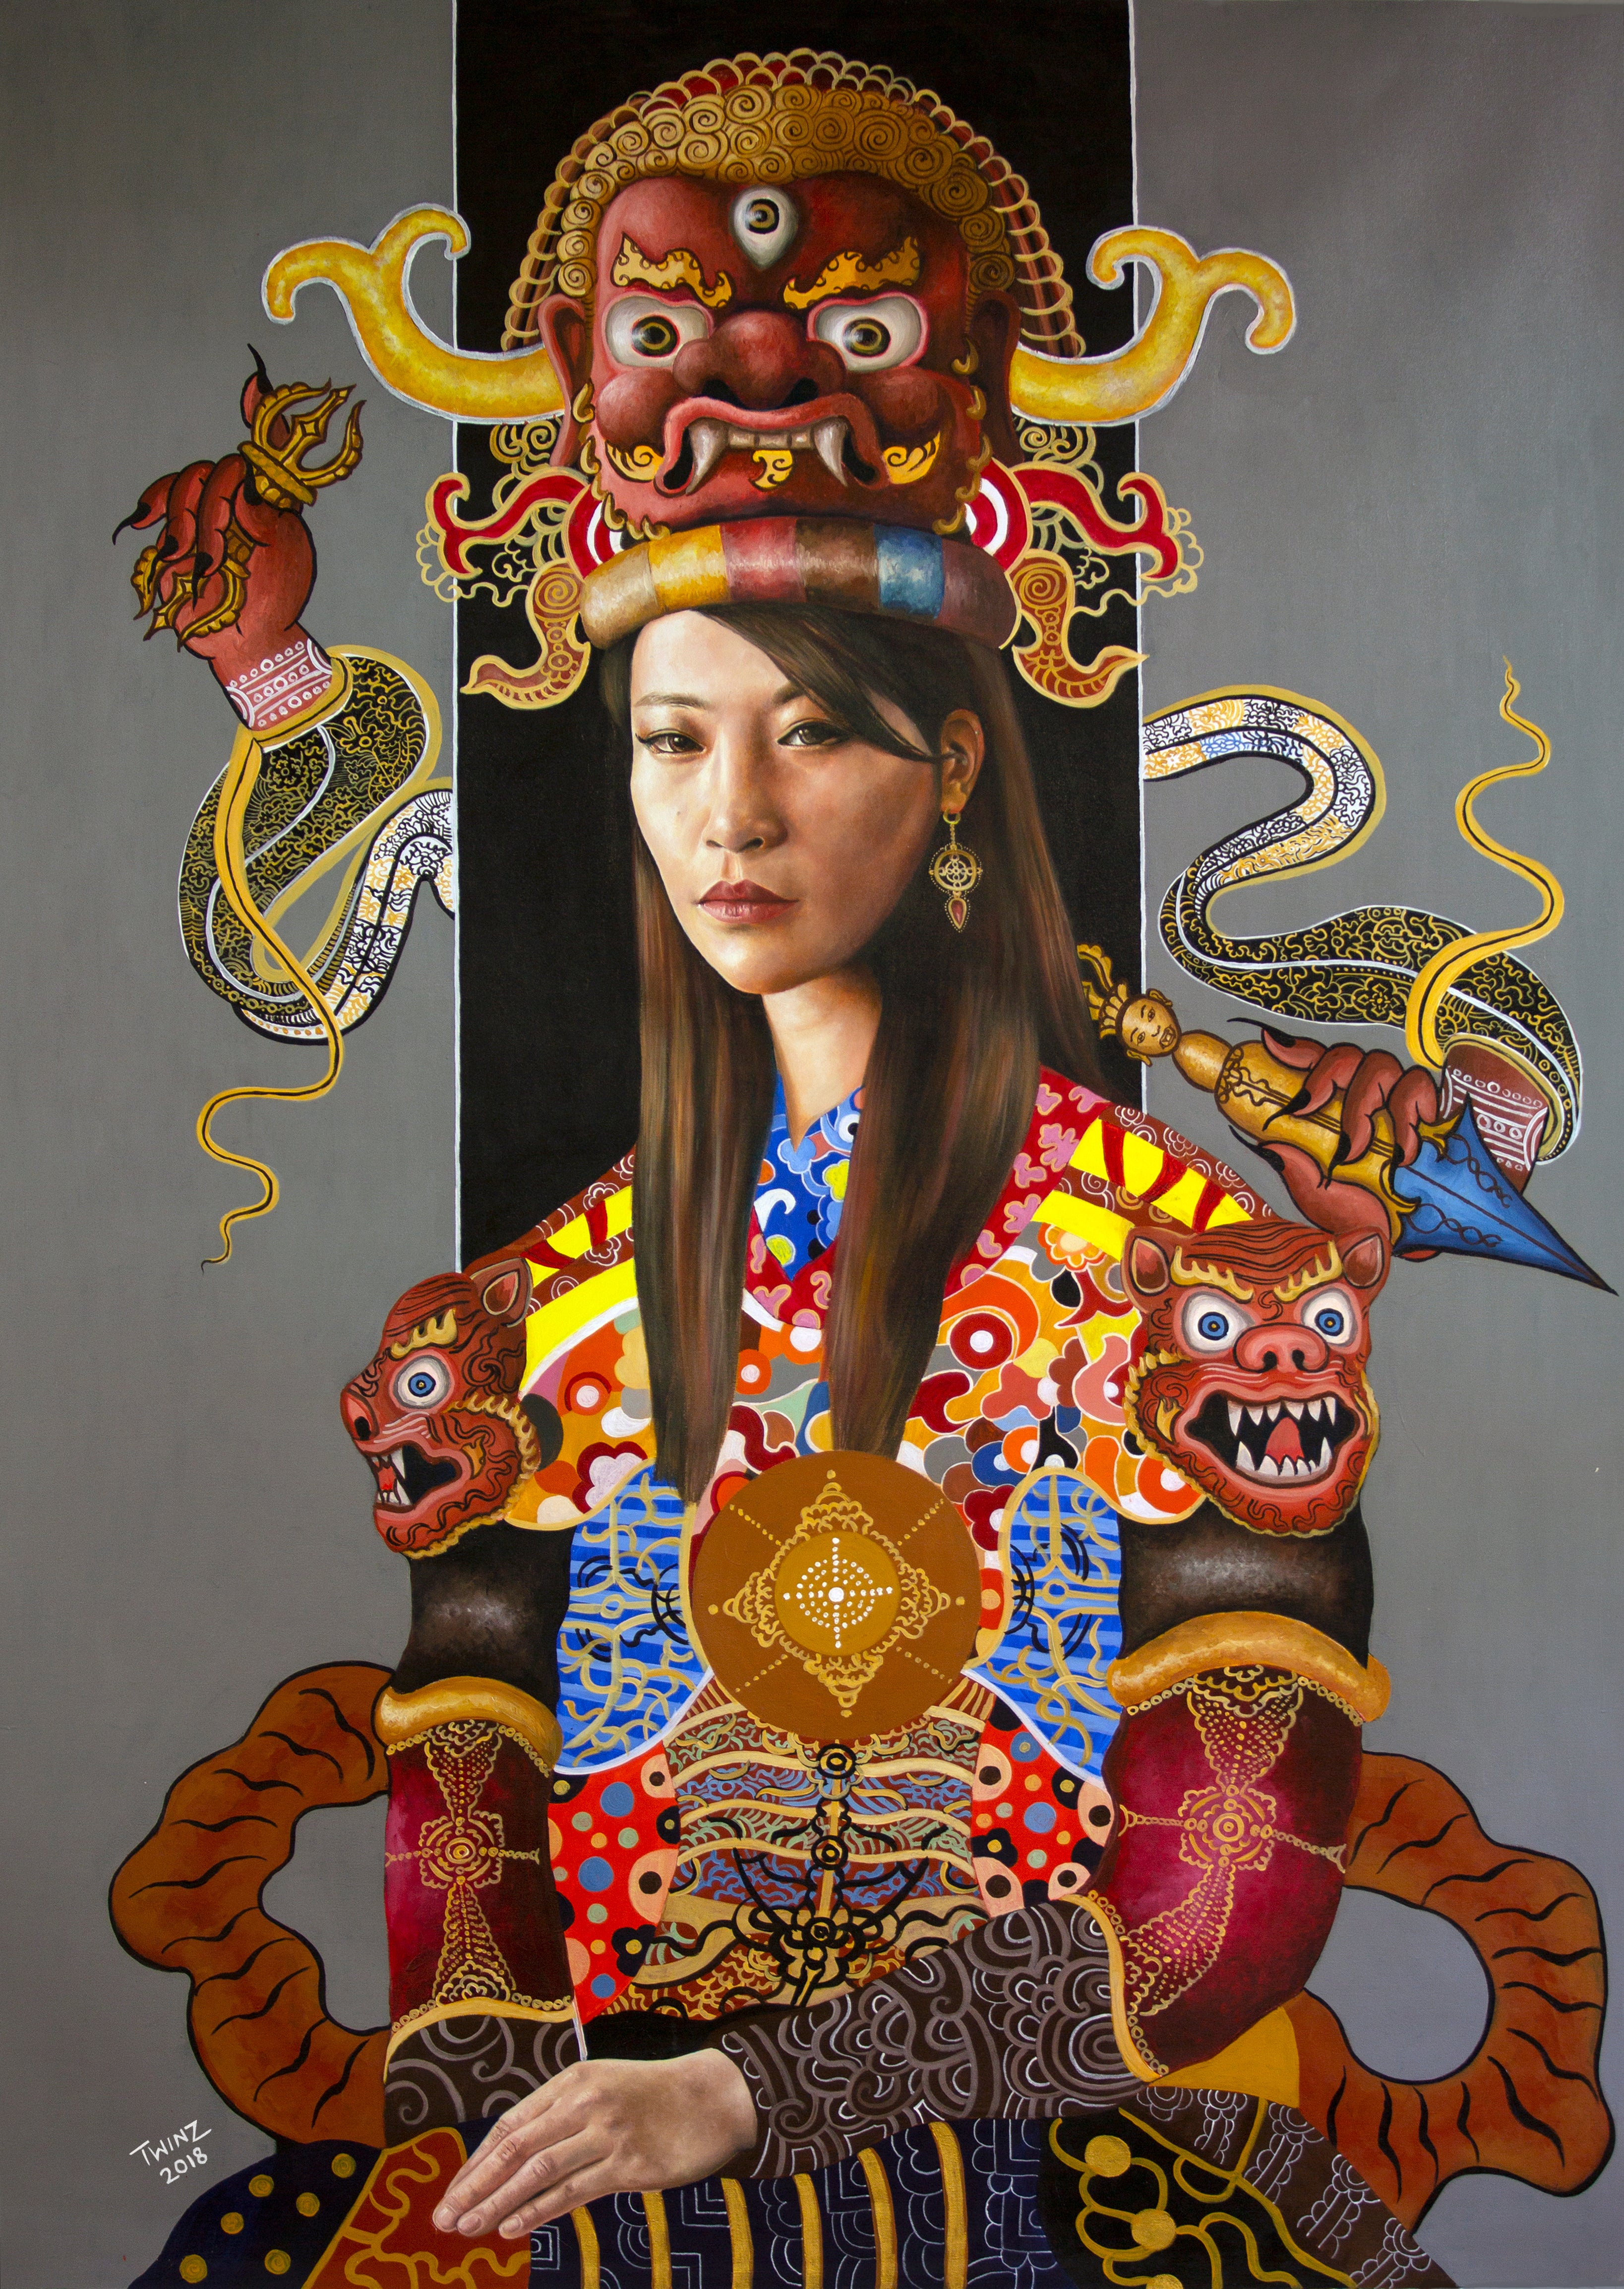 'THE GUARDIAN OF THE TRANSCENDENT WORLD' - Contemporary Bhutanese Painting